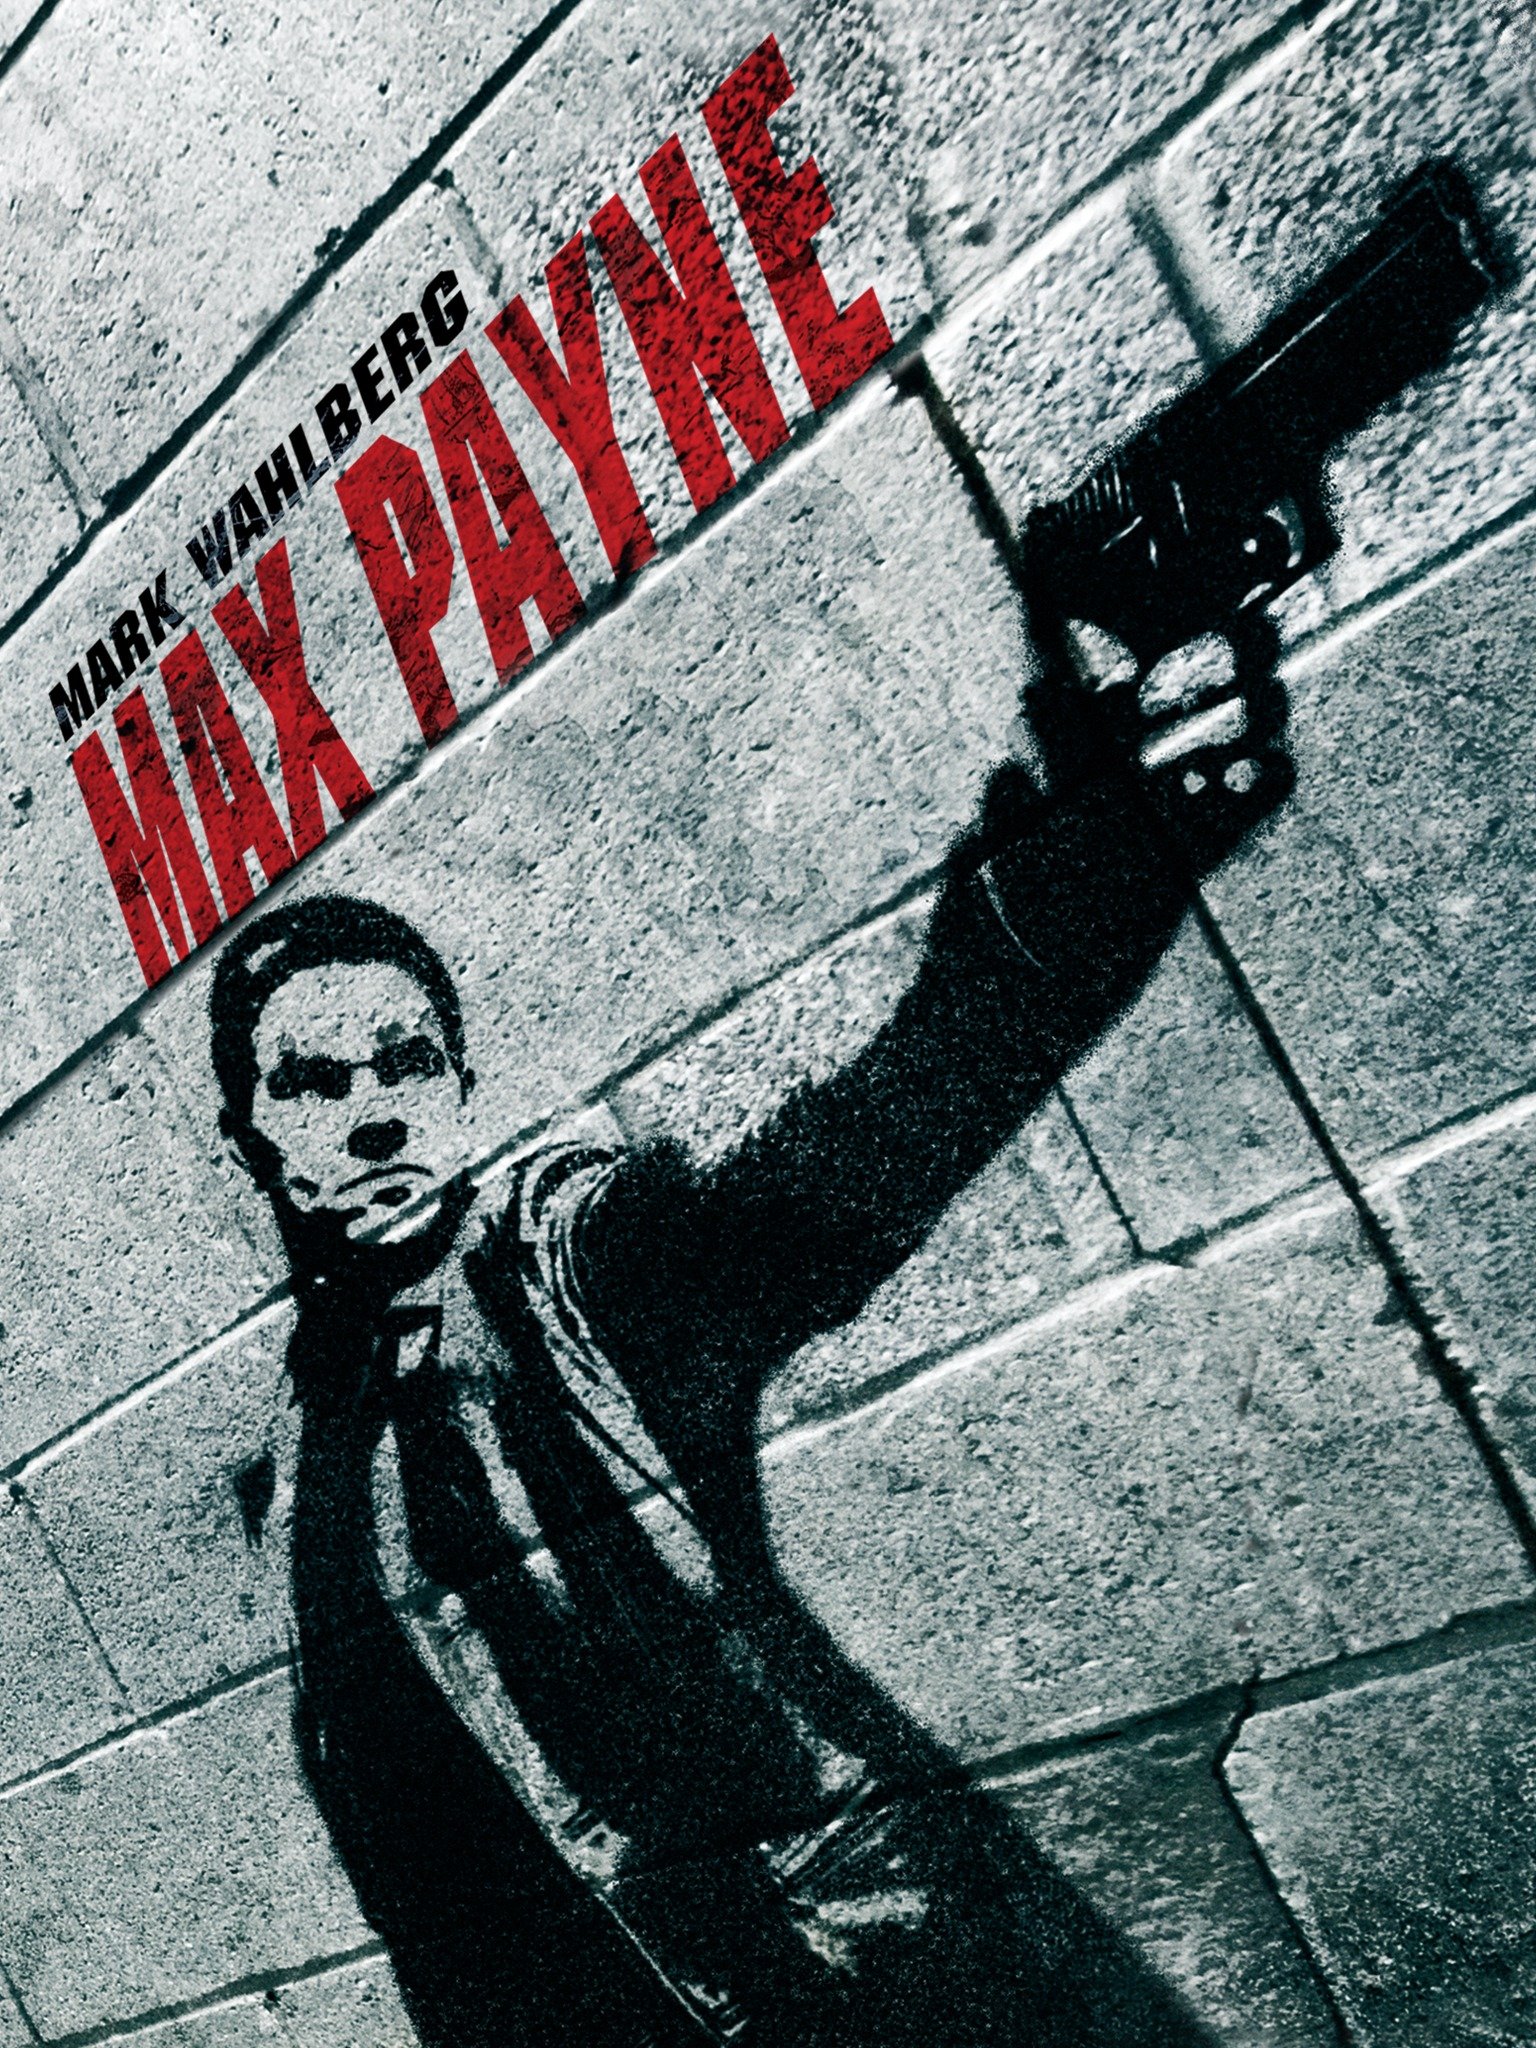 max payne 2 quotes